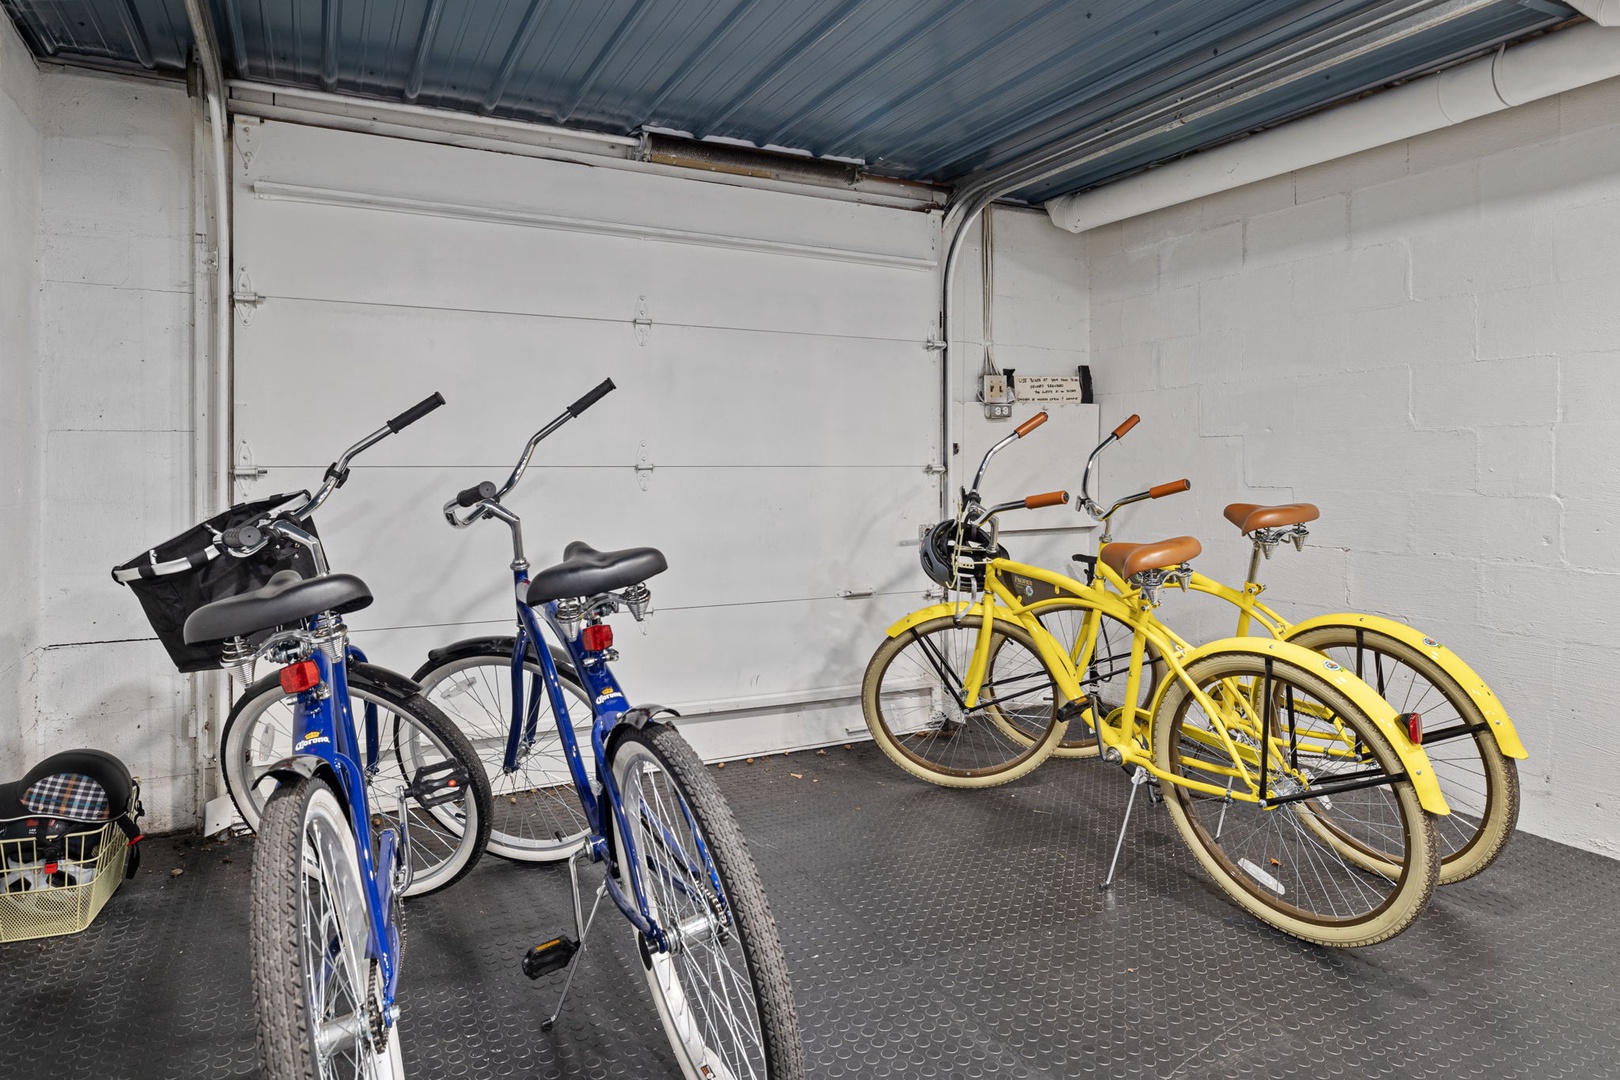 You have access to 4 cruiser bicycles any time you like!